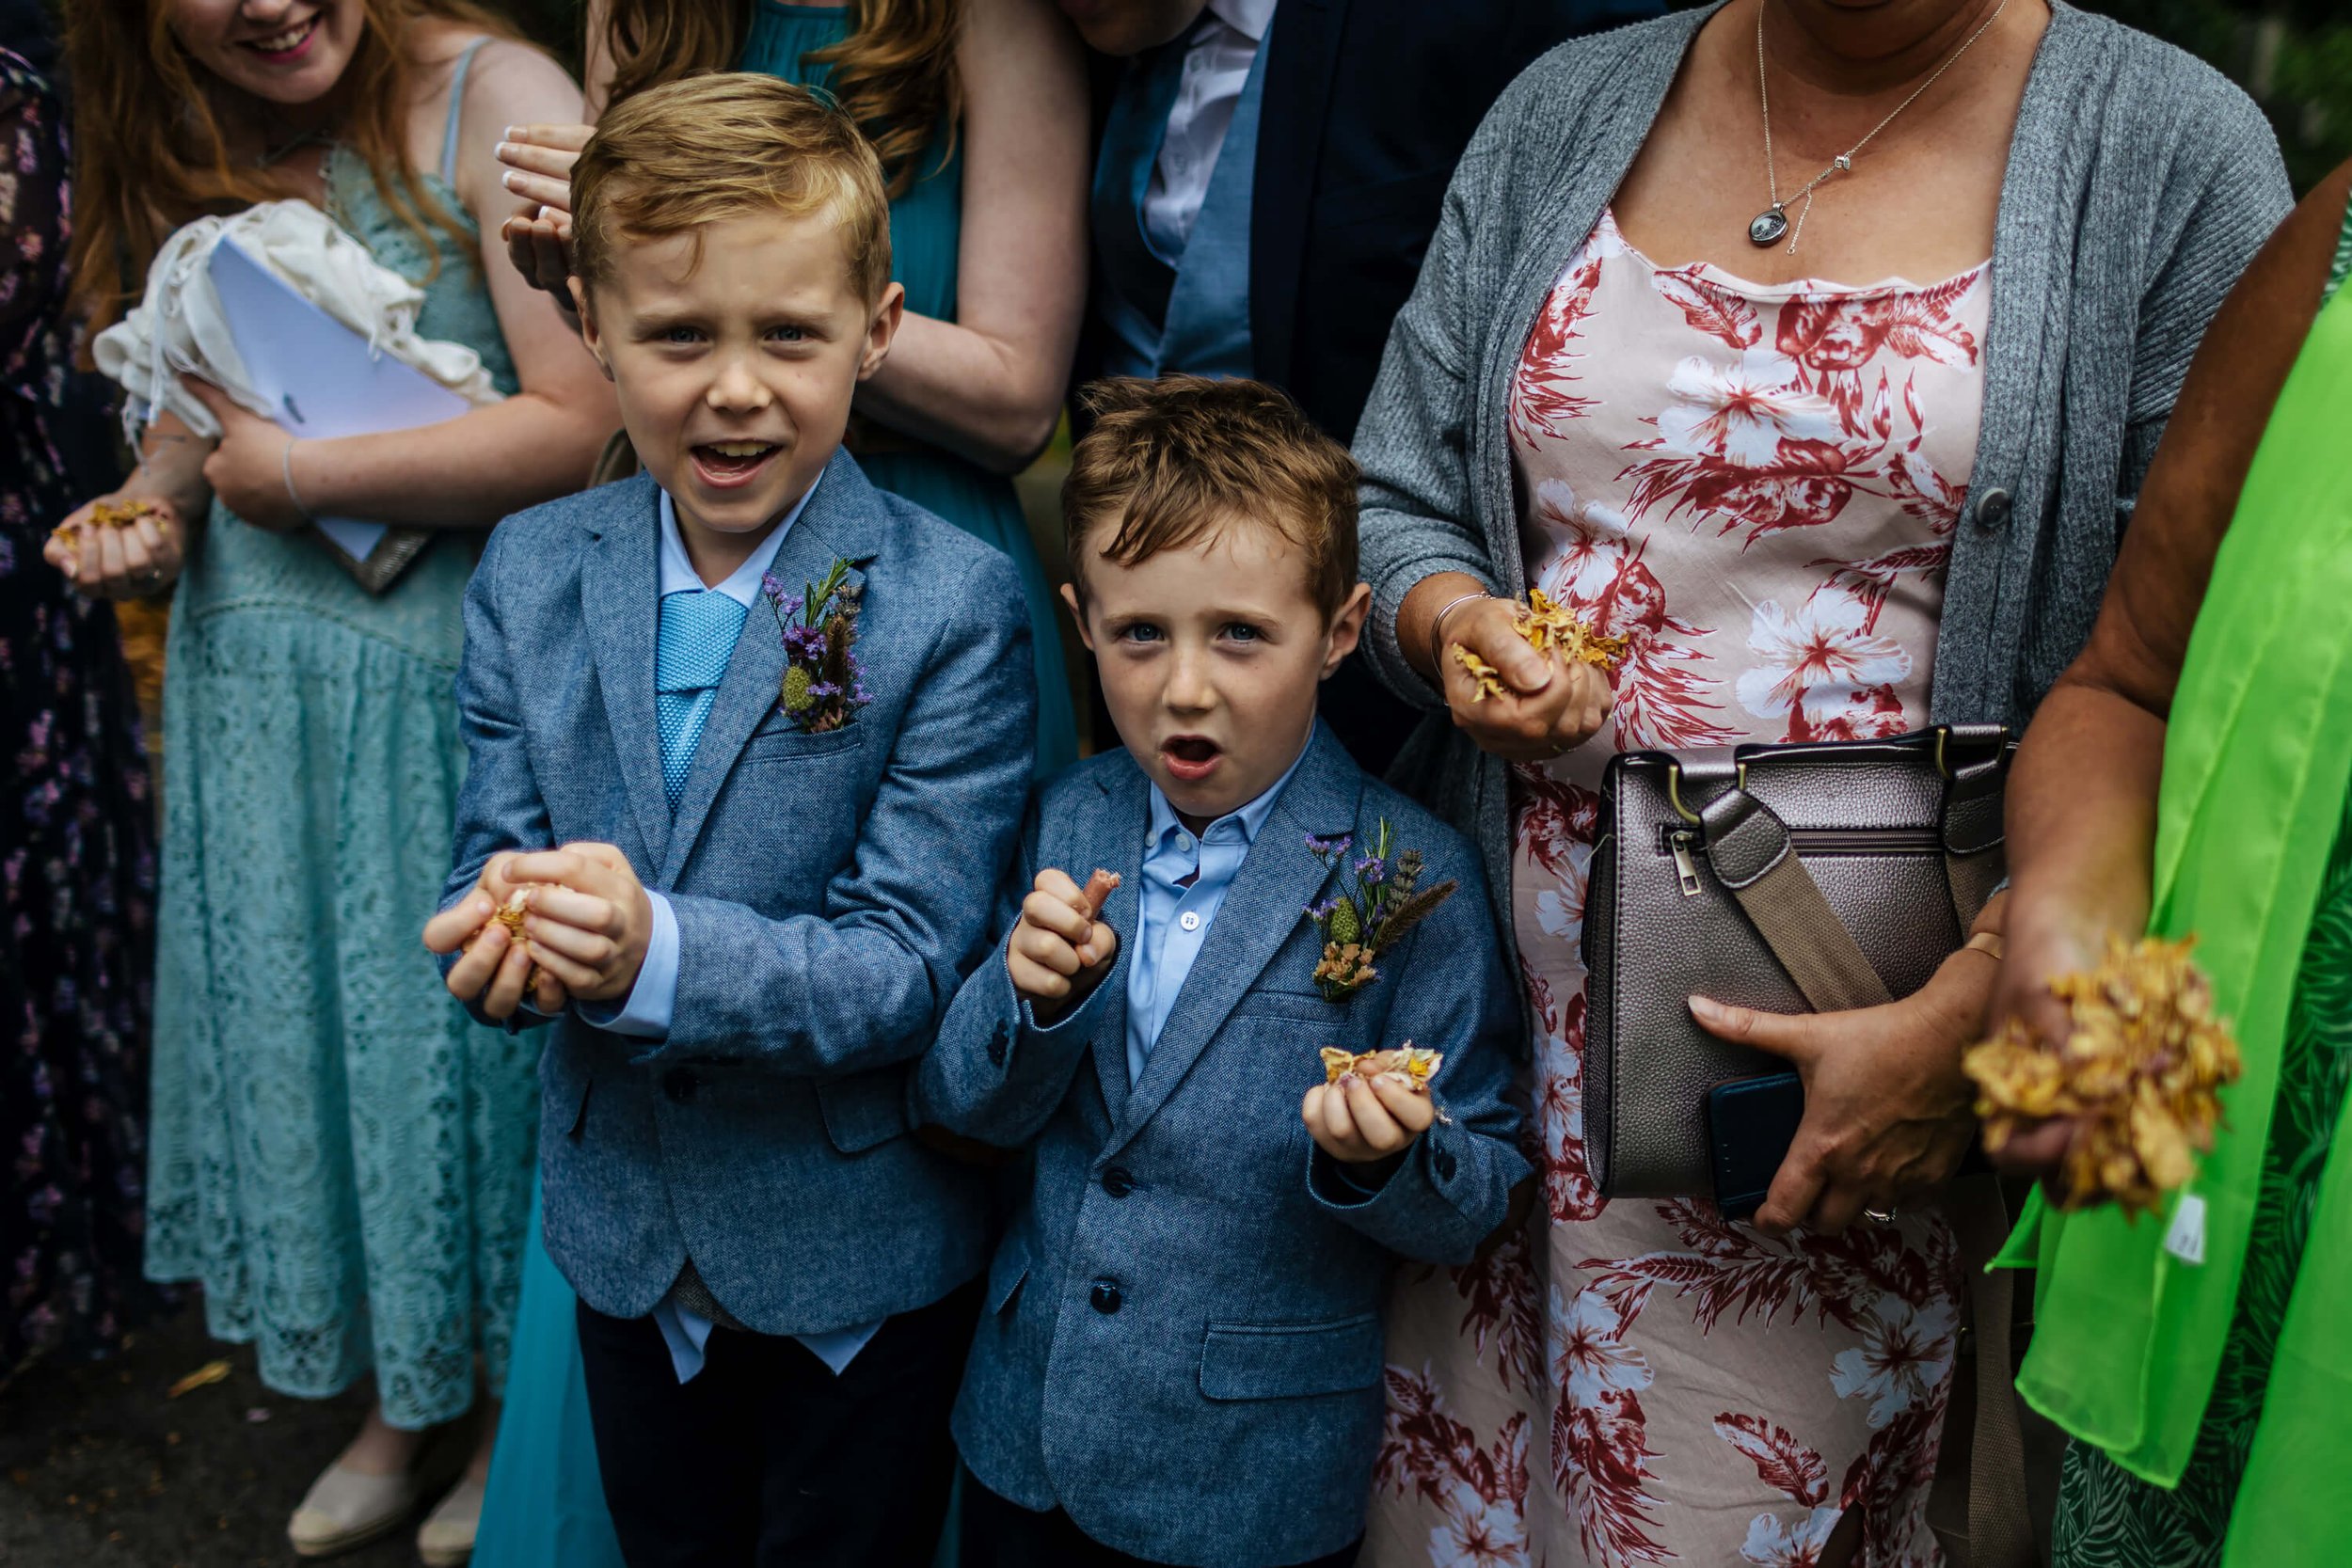 Young boys ready to throw the confetti at a wedding